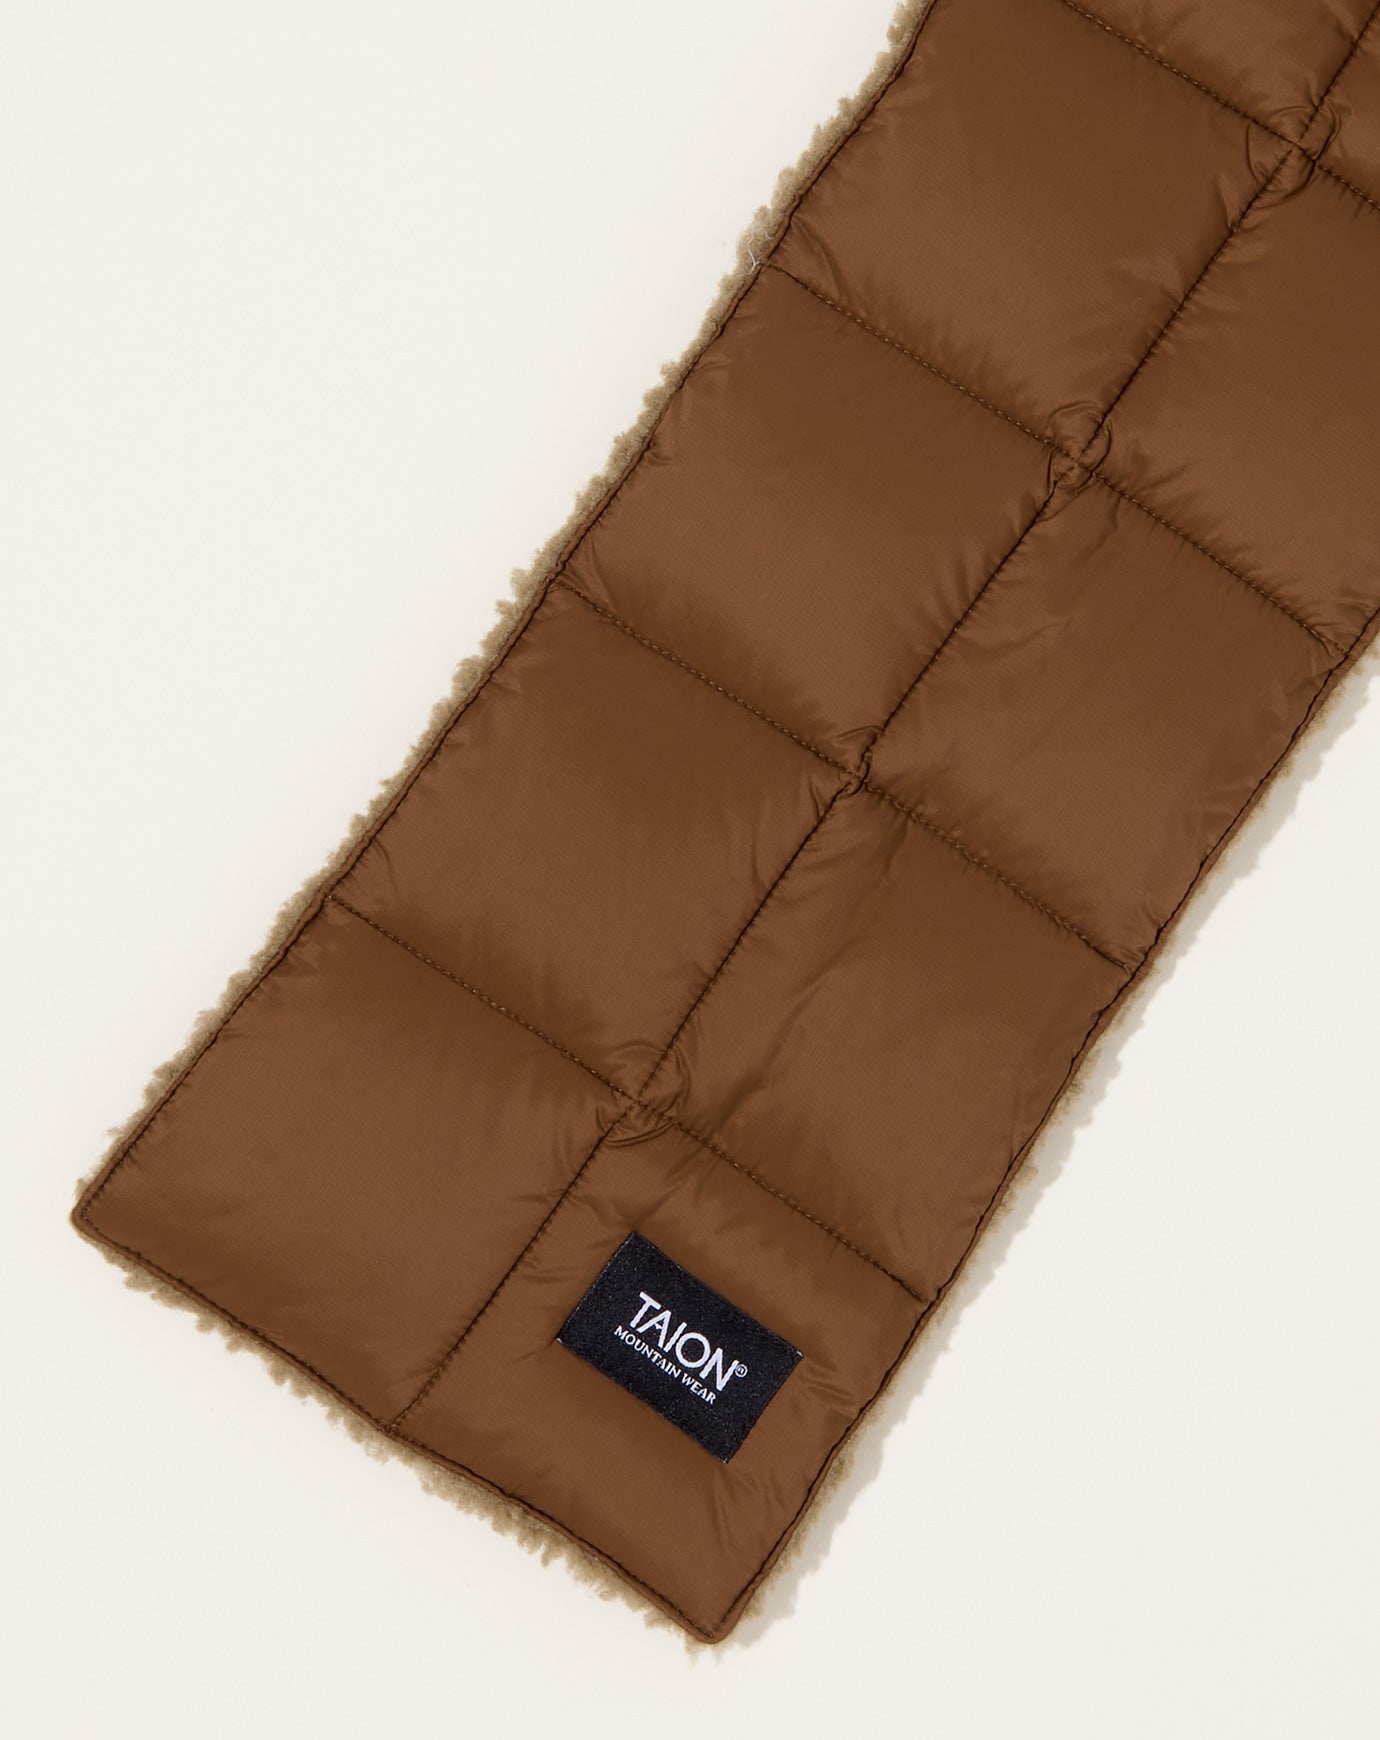 Taion Reversible Mountain Down X BOA Scarf in Light Brown & Beige